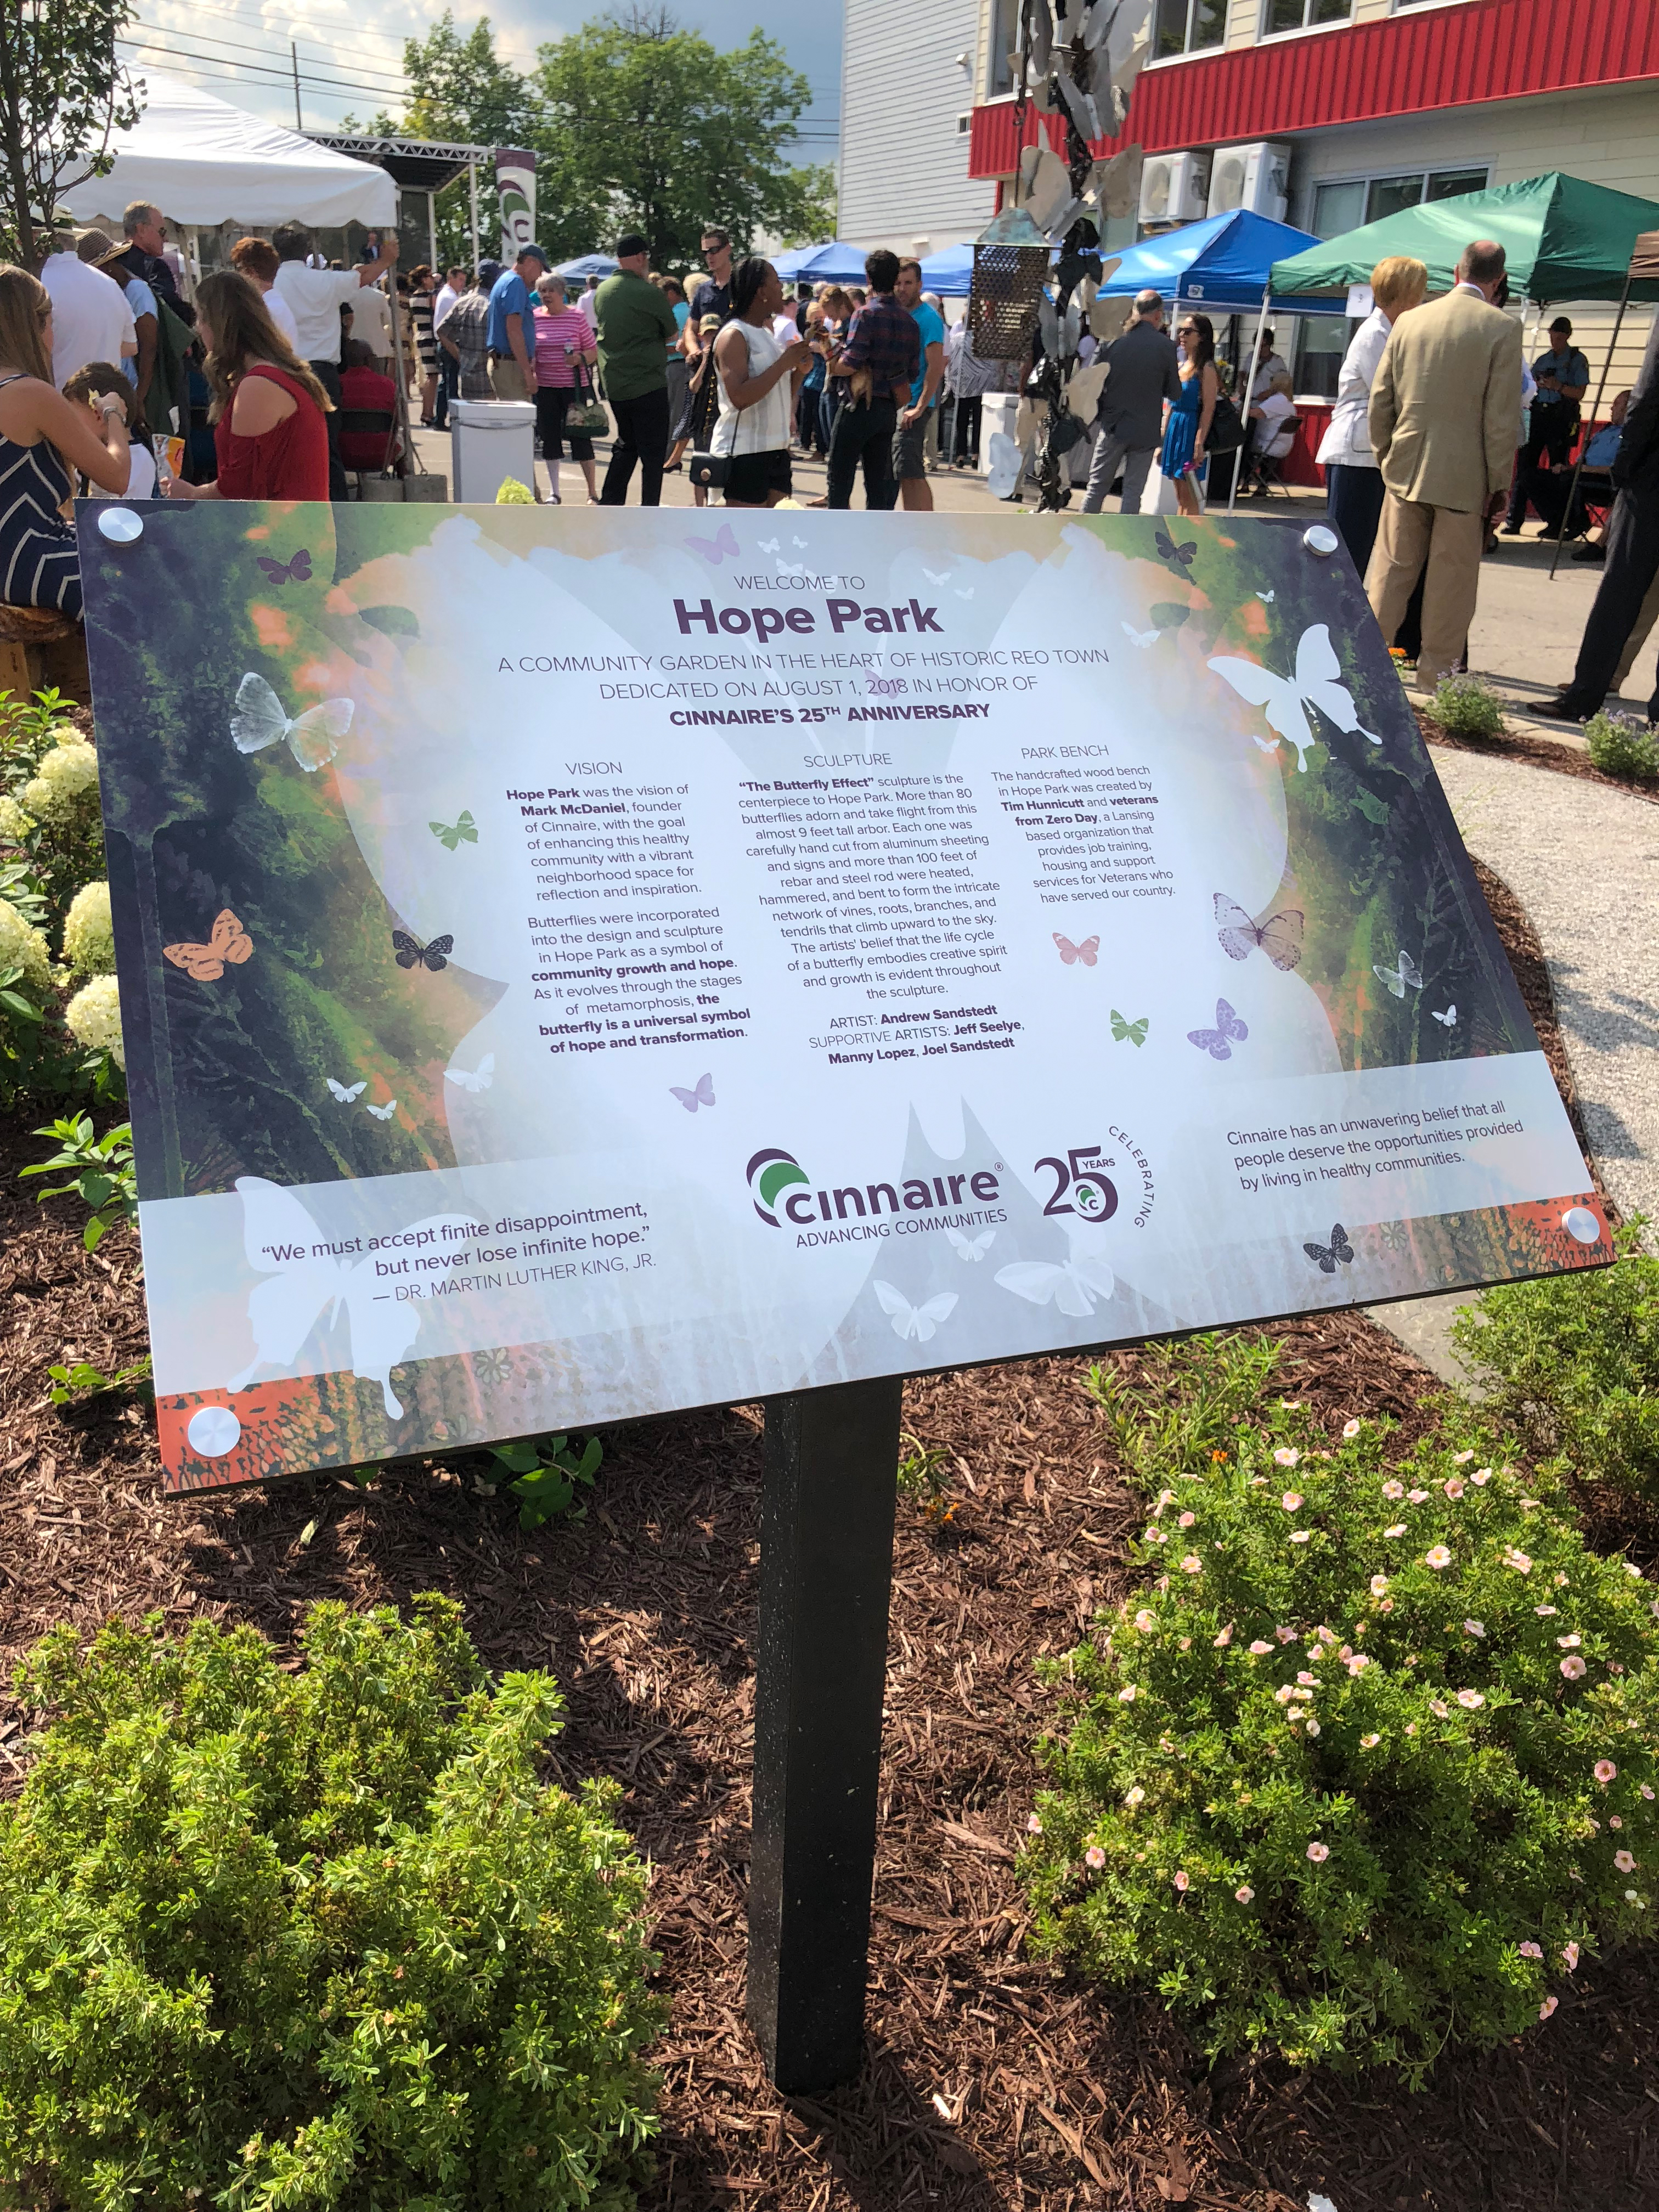 Cinnaire Creates Hope Park in the Heart of Historic Reo Town